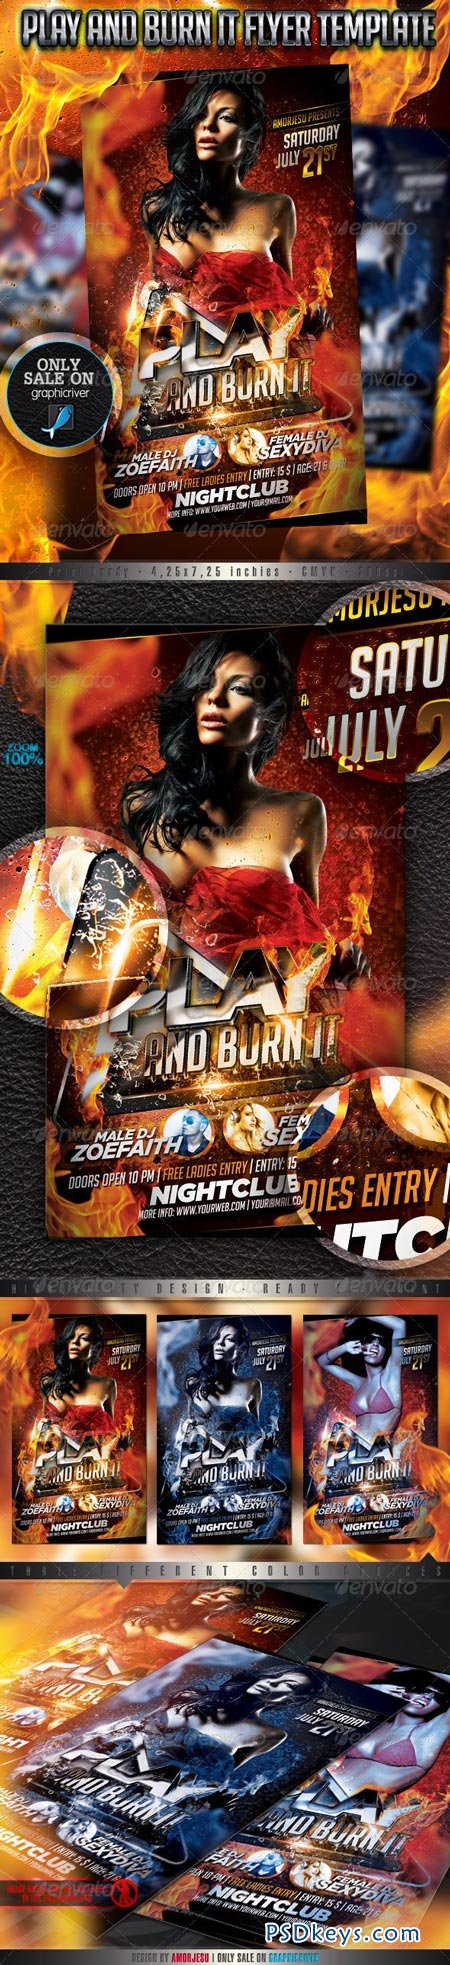 Play And Burn It Flyer Template 2642382